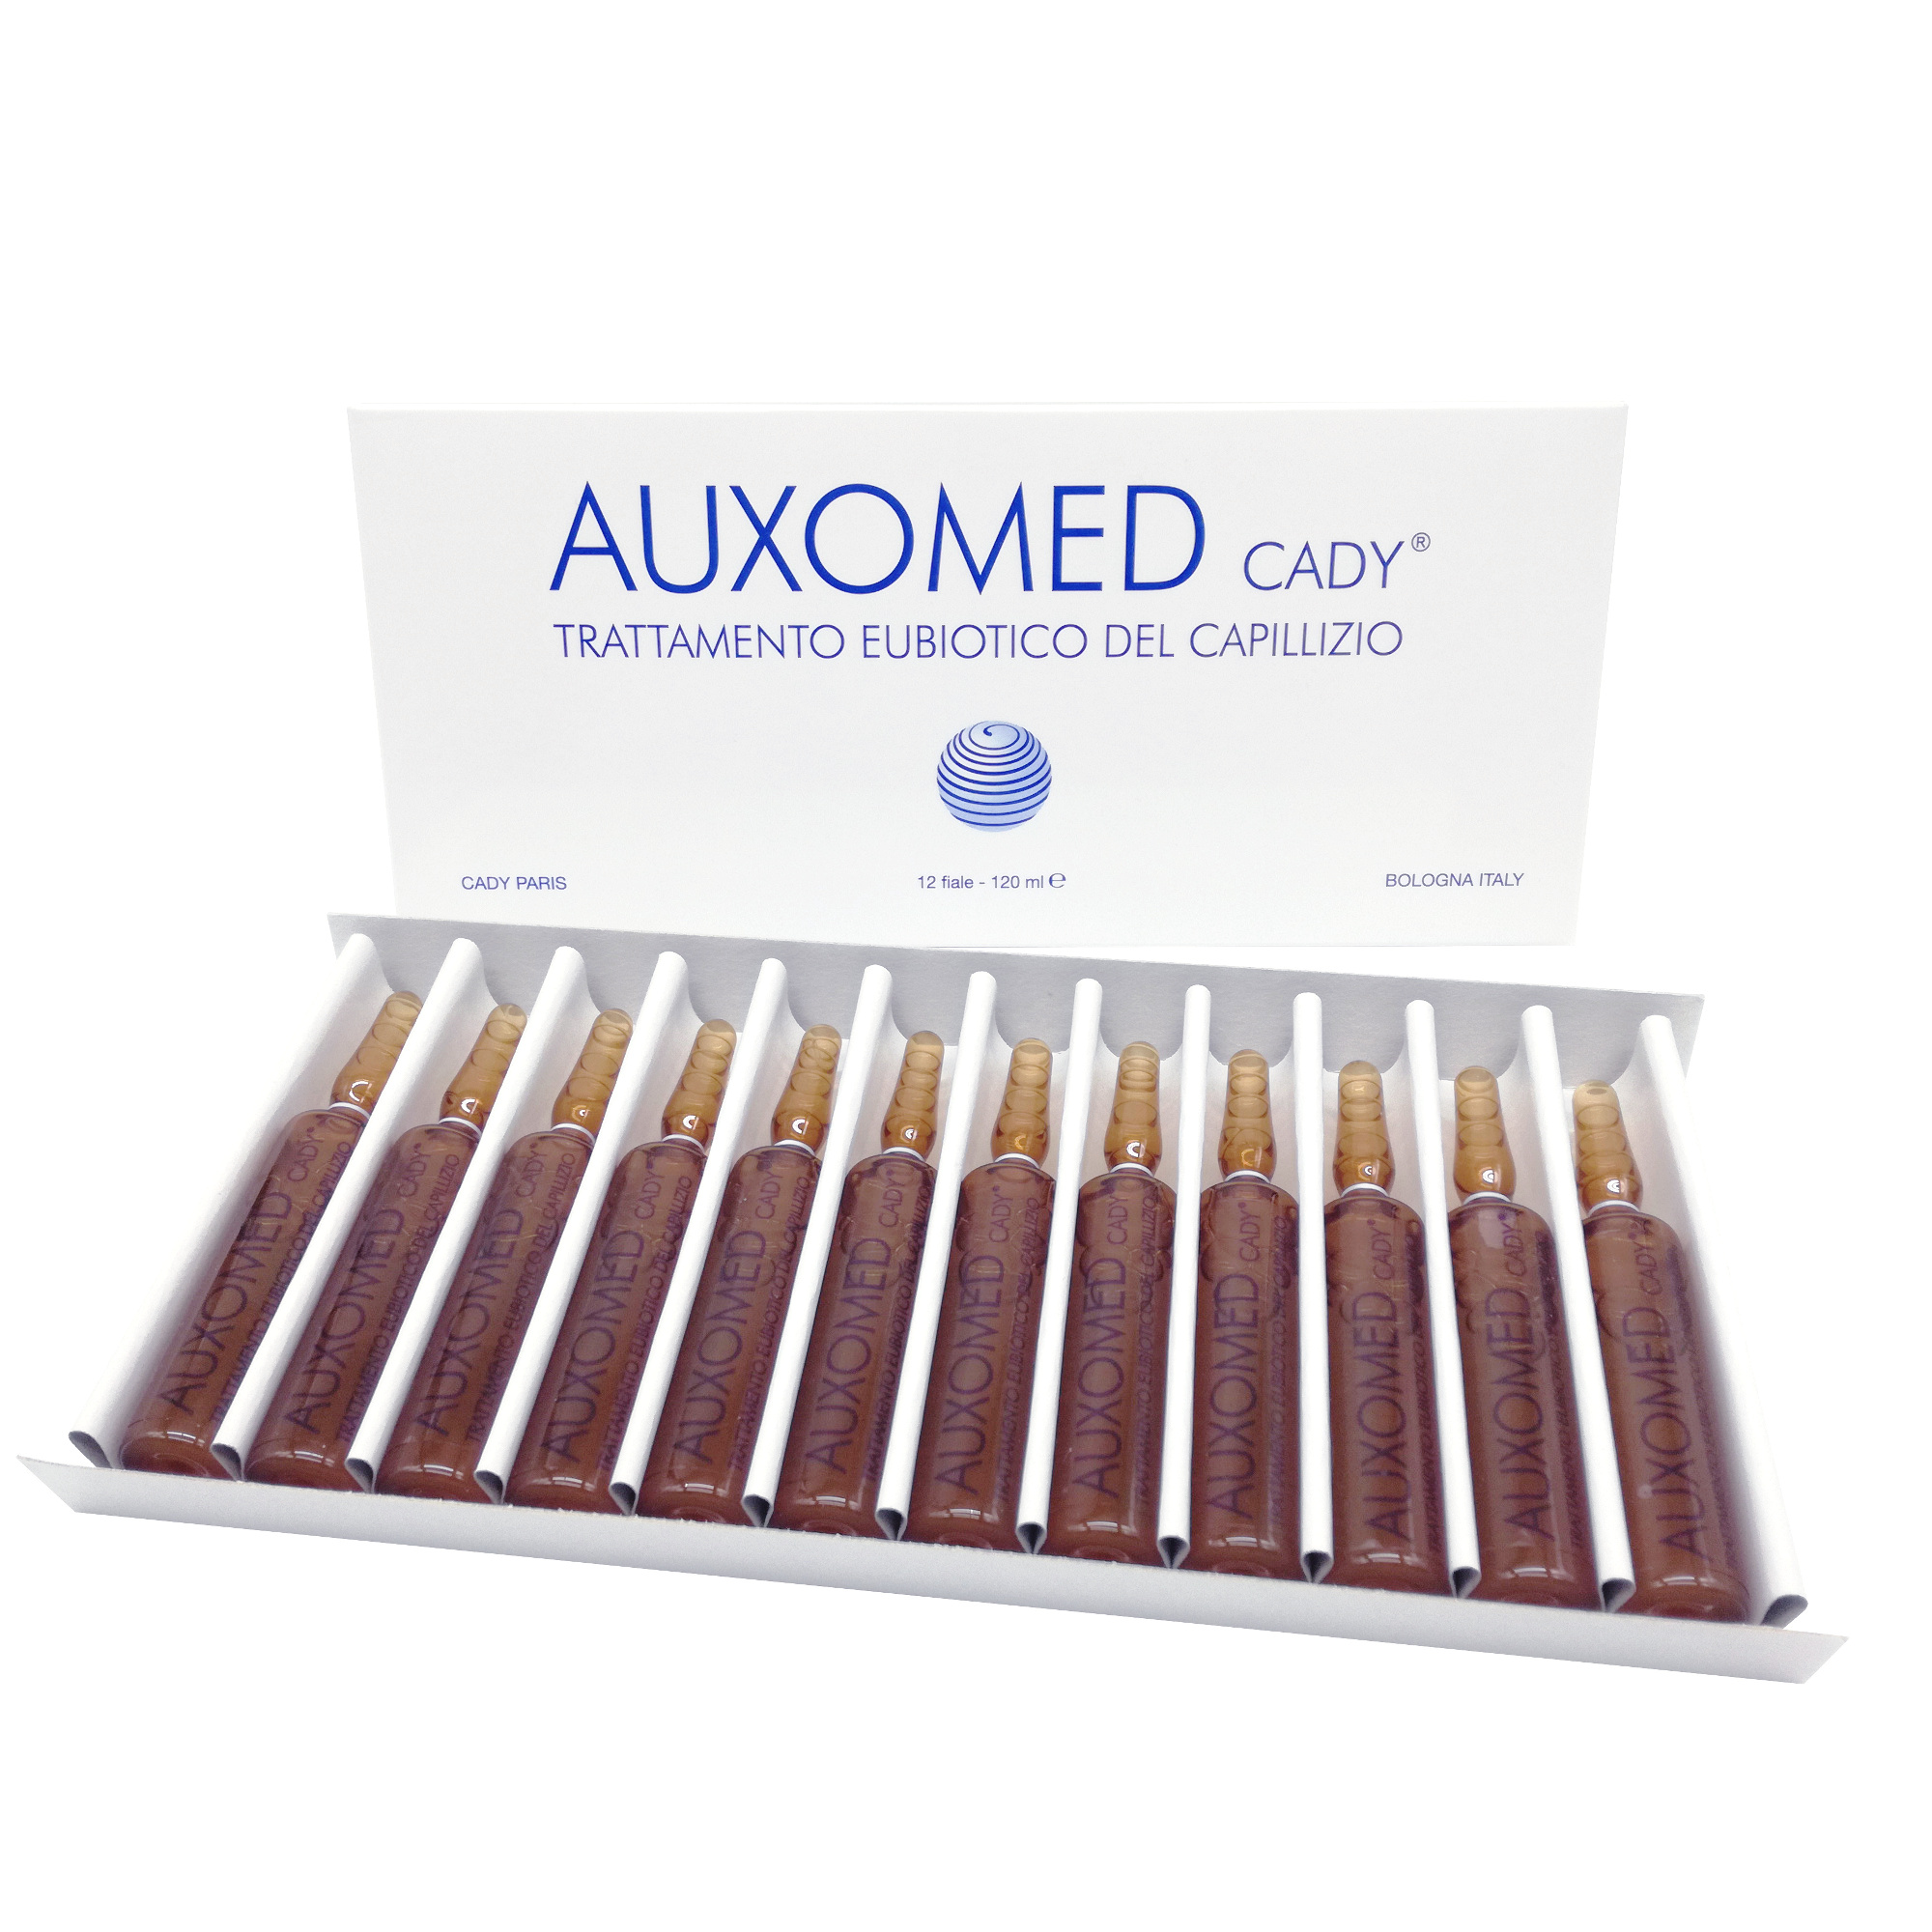 Auxomed